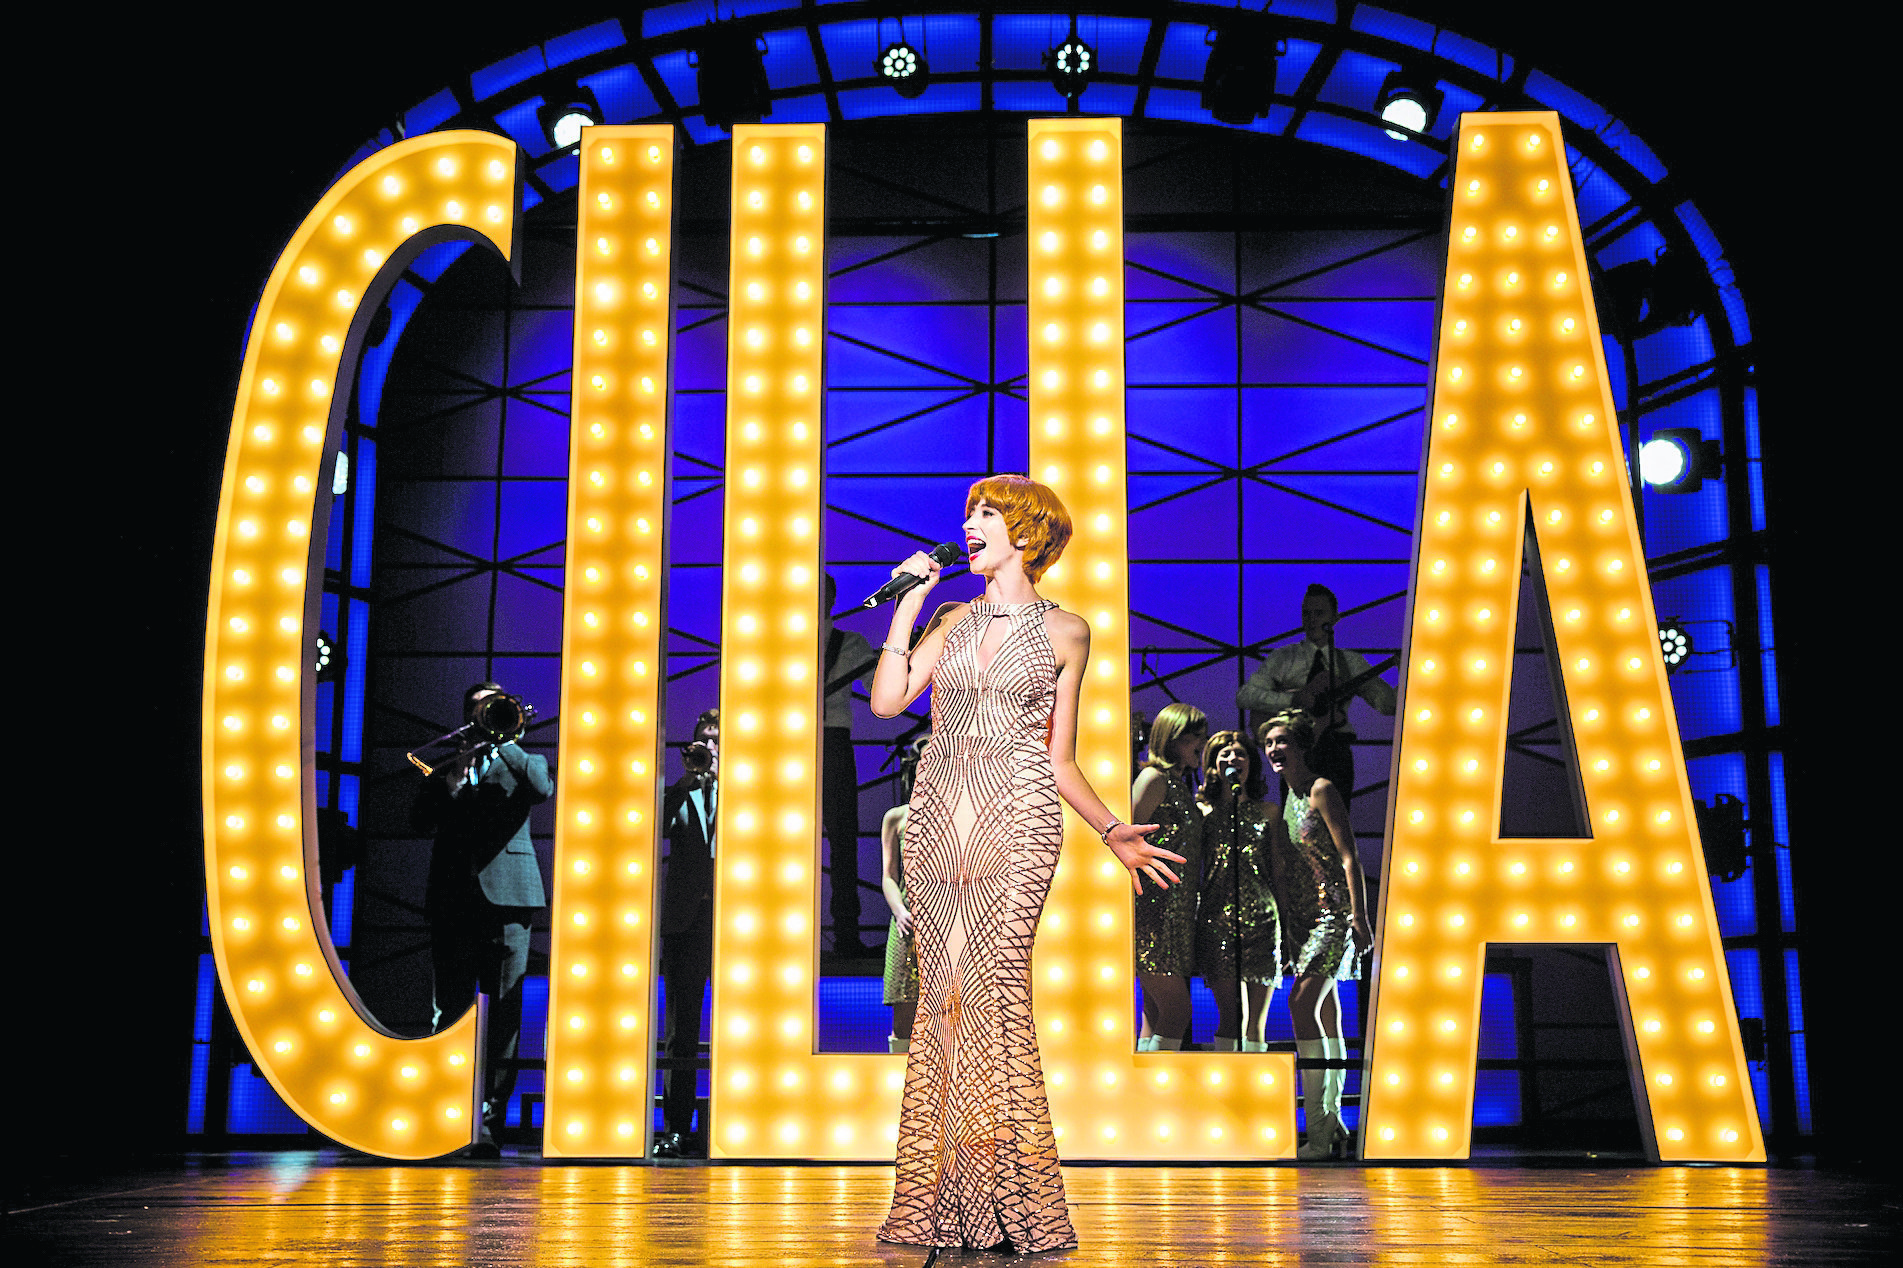 Kara Lily Hayworth’s mannerisms, feisty nature and outstanding voice was captivating the whole way 
through.